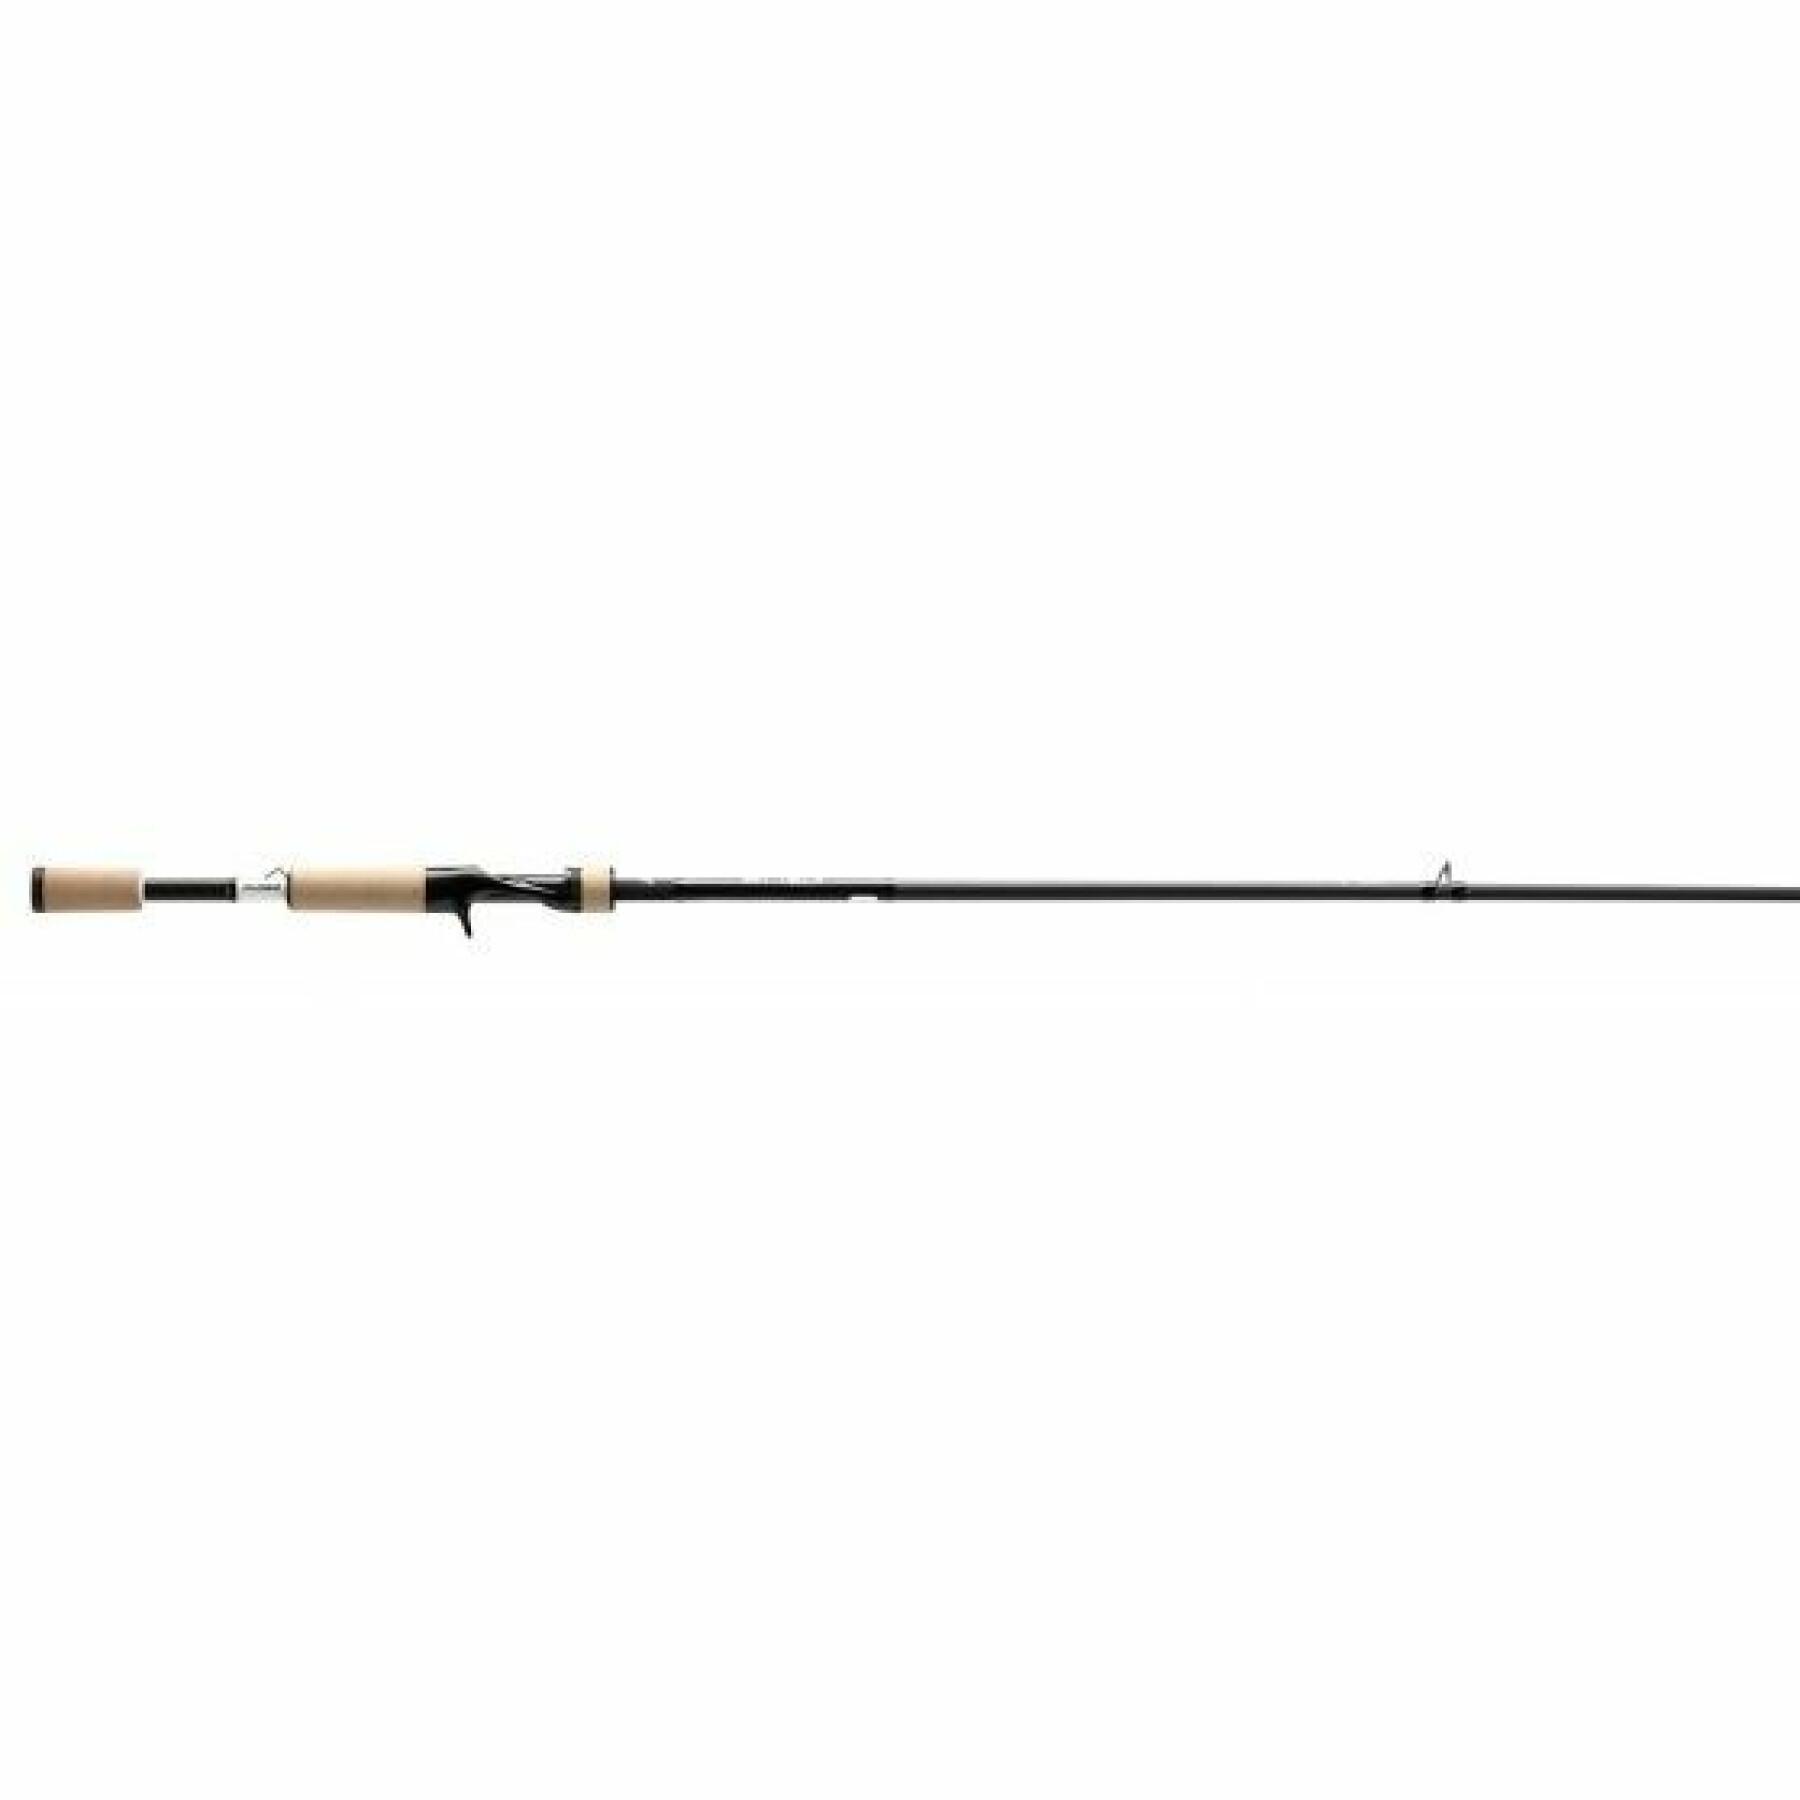 Angelrute 13 Fishing Omen Spin 2,44m 20-80g